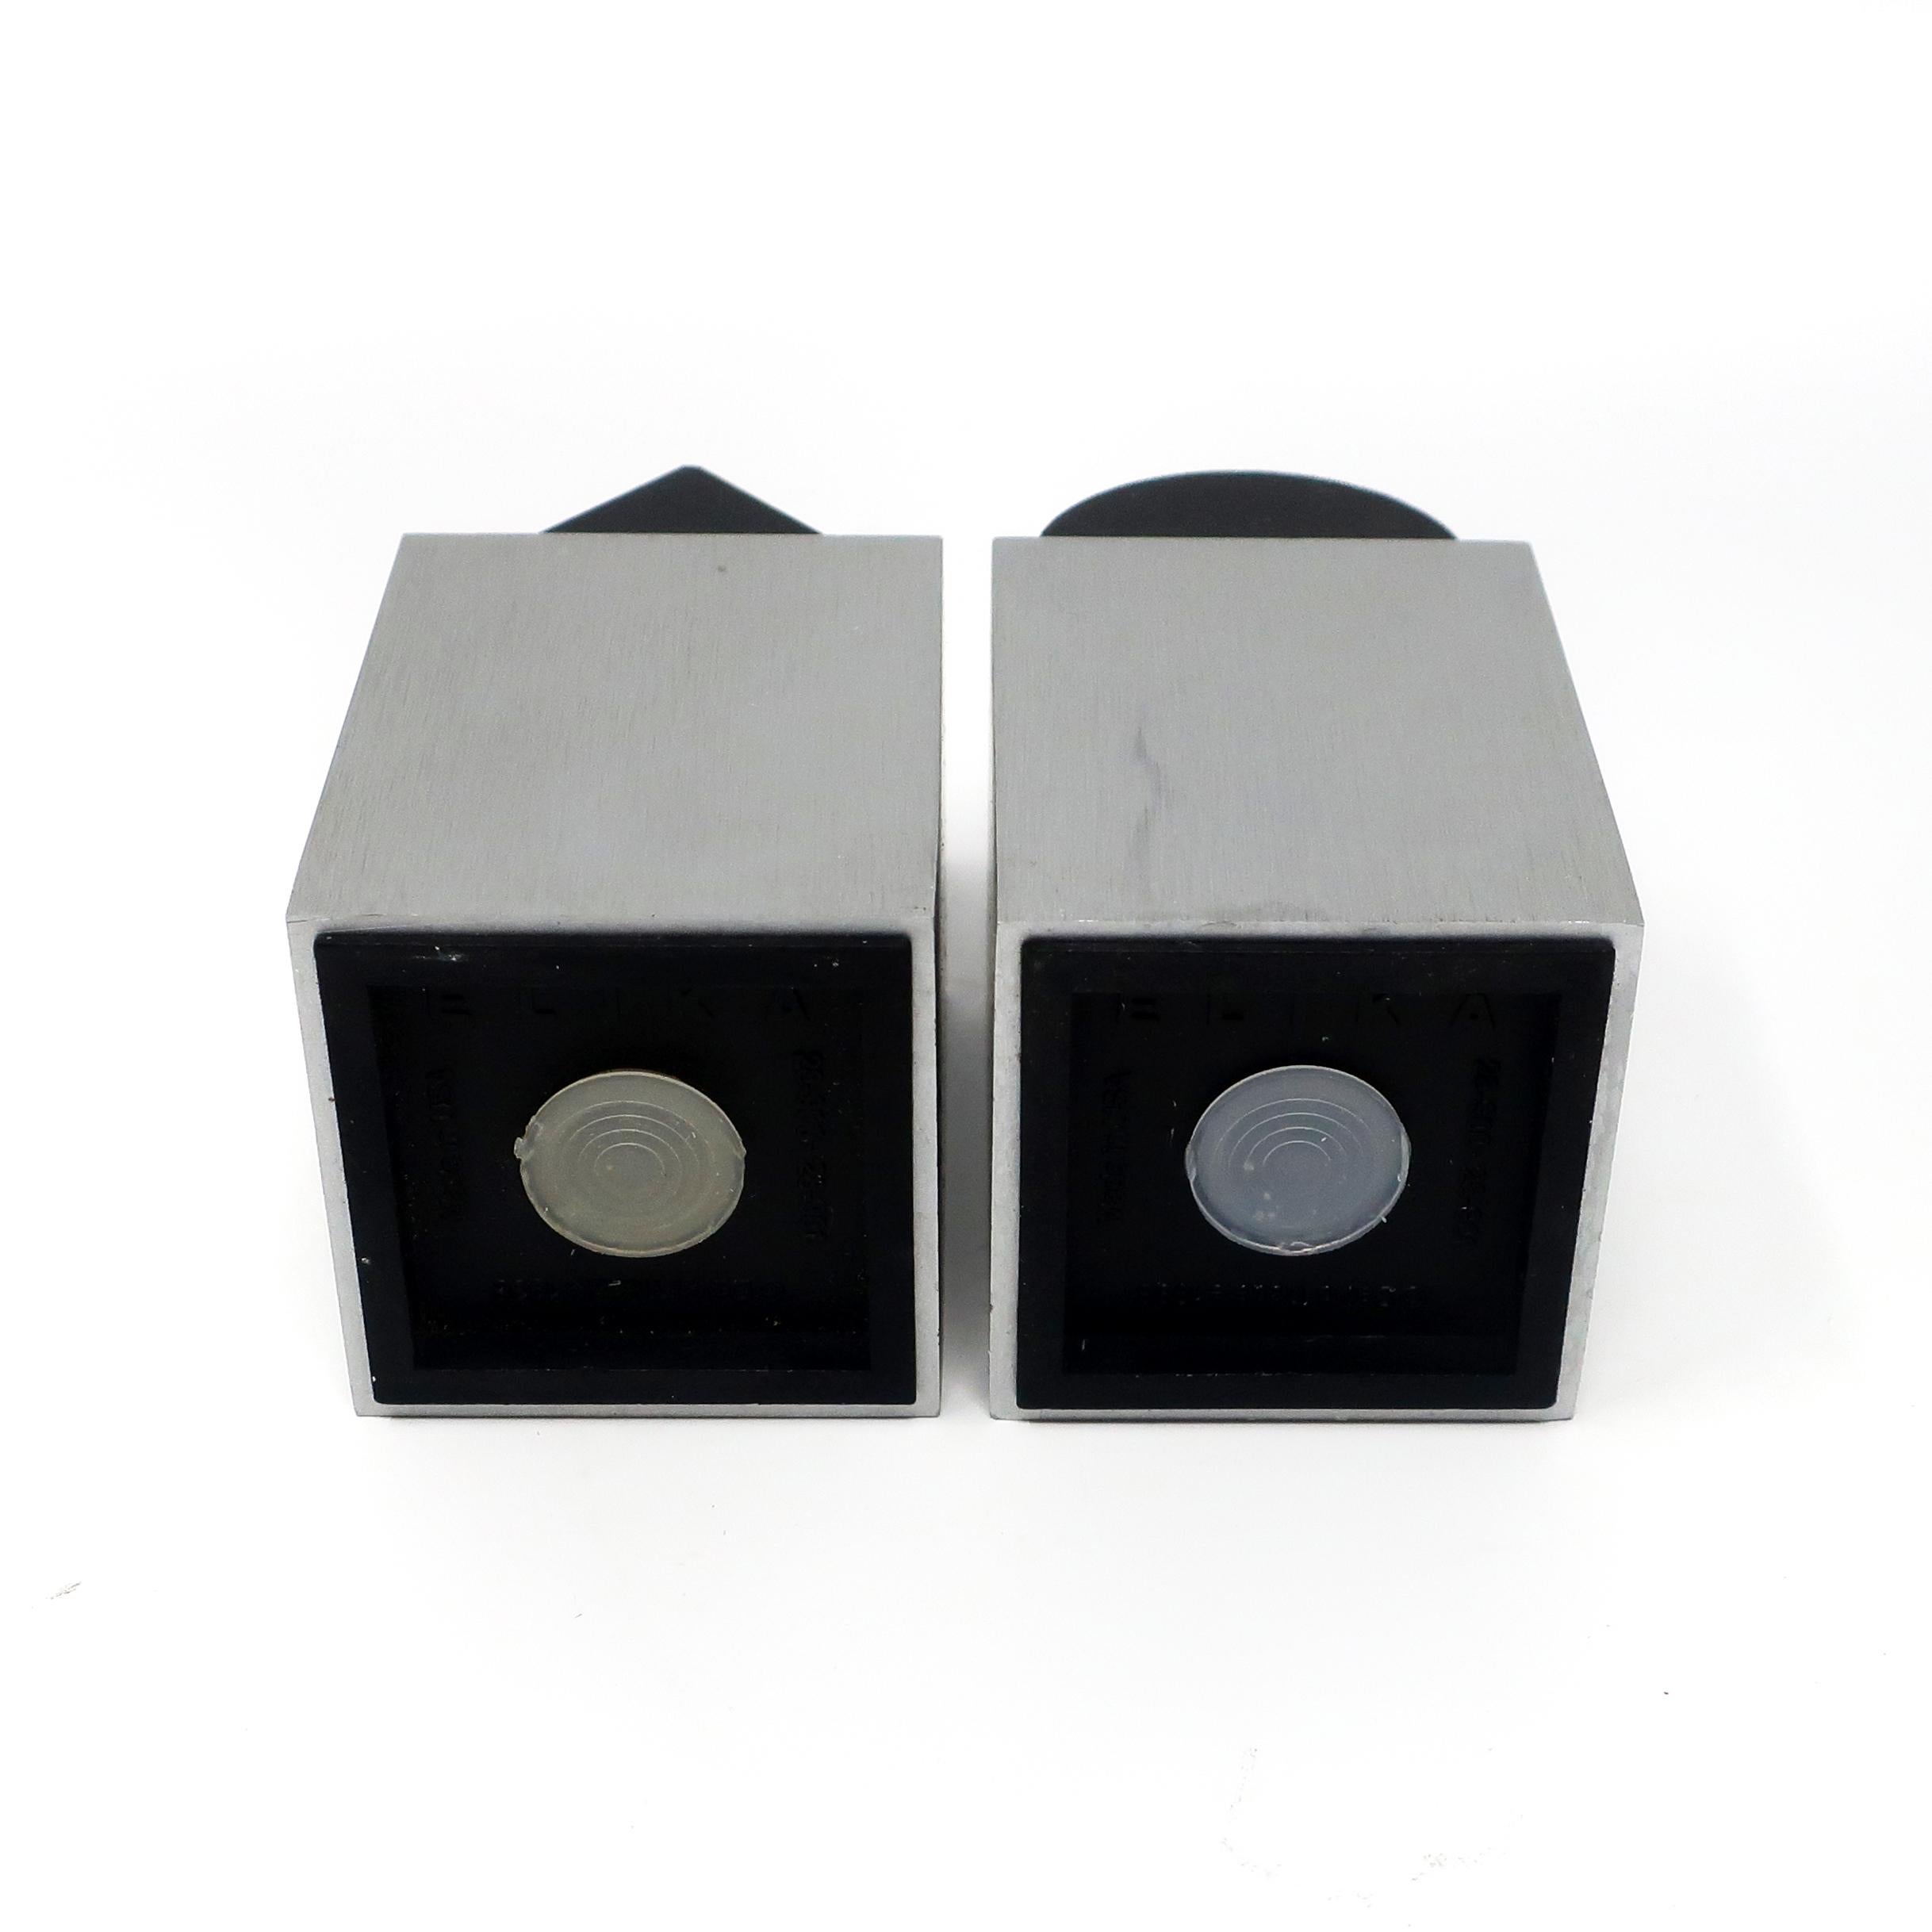 20th Century Postmodern Aluminum Salt and Pepper by David Tisdale for Elika